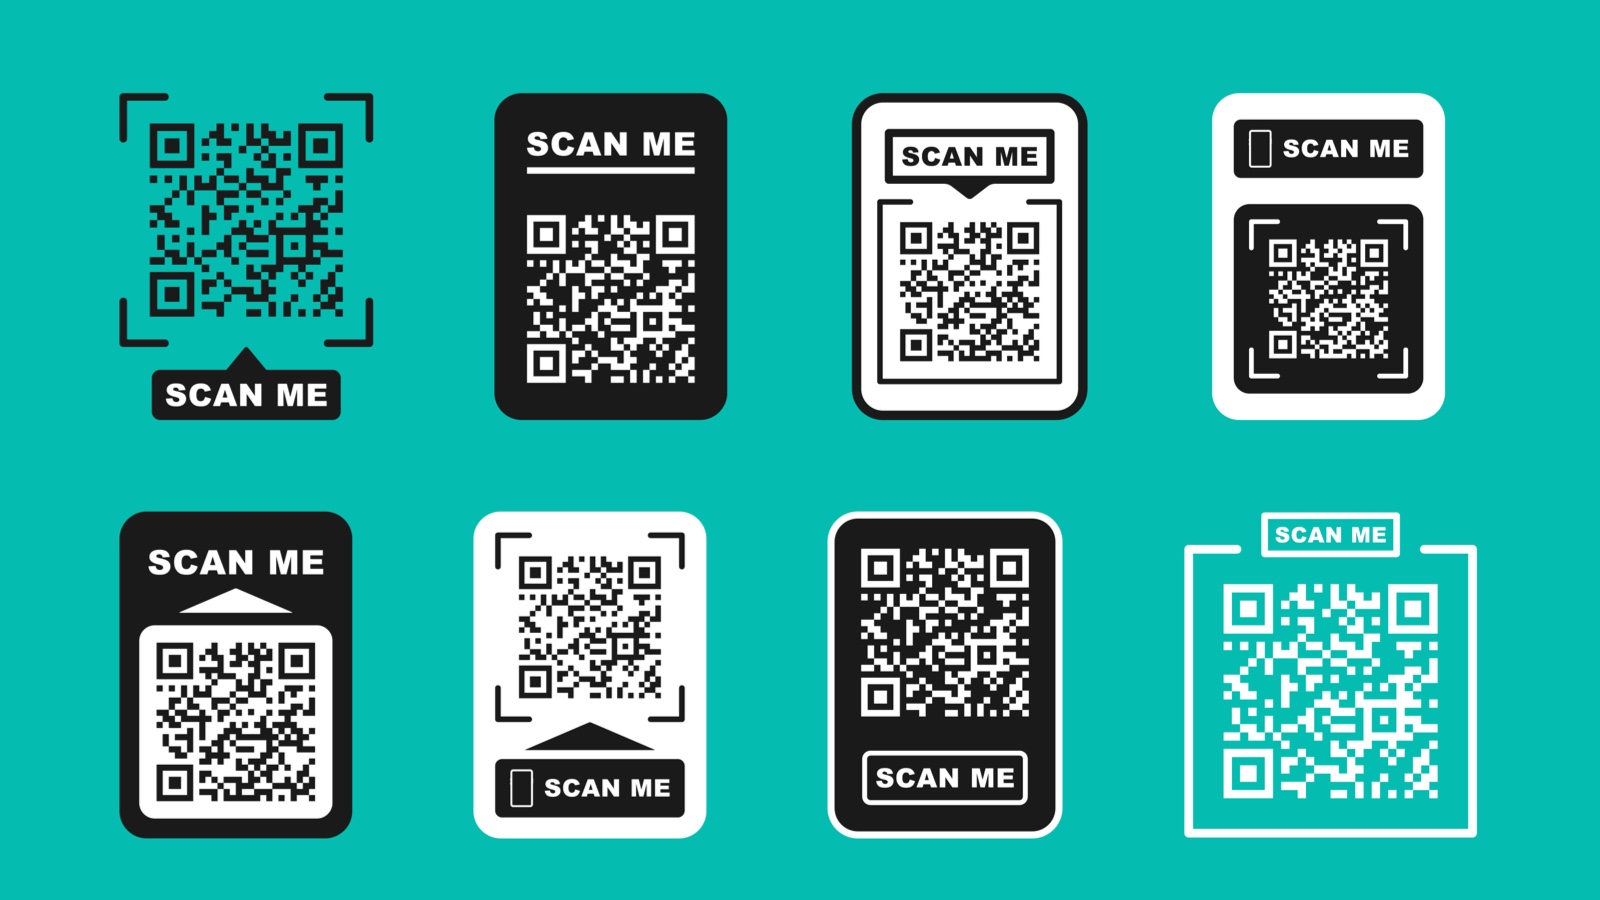 8 Ways to Use QR Codes in Higher Education Classrooms